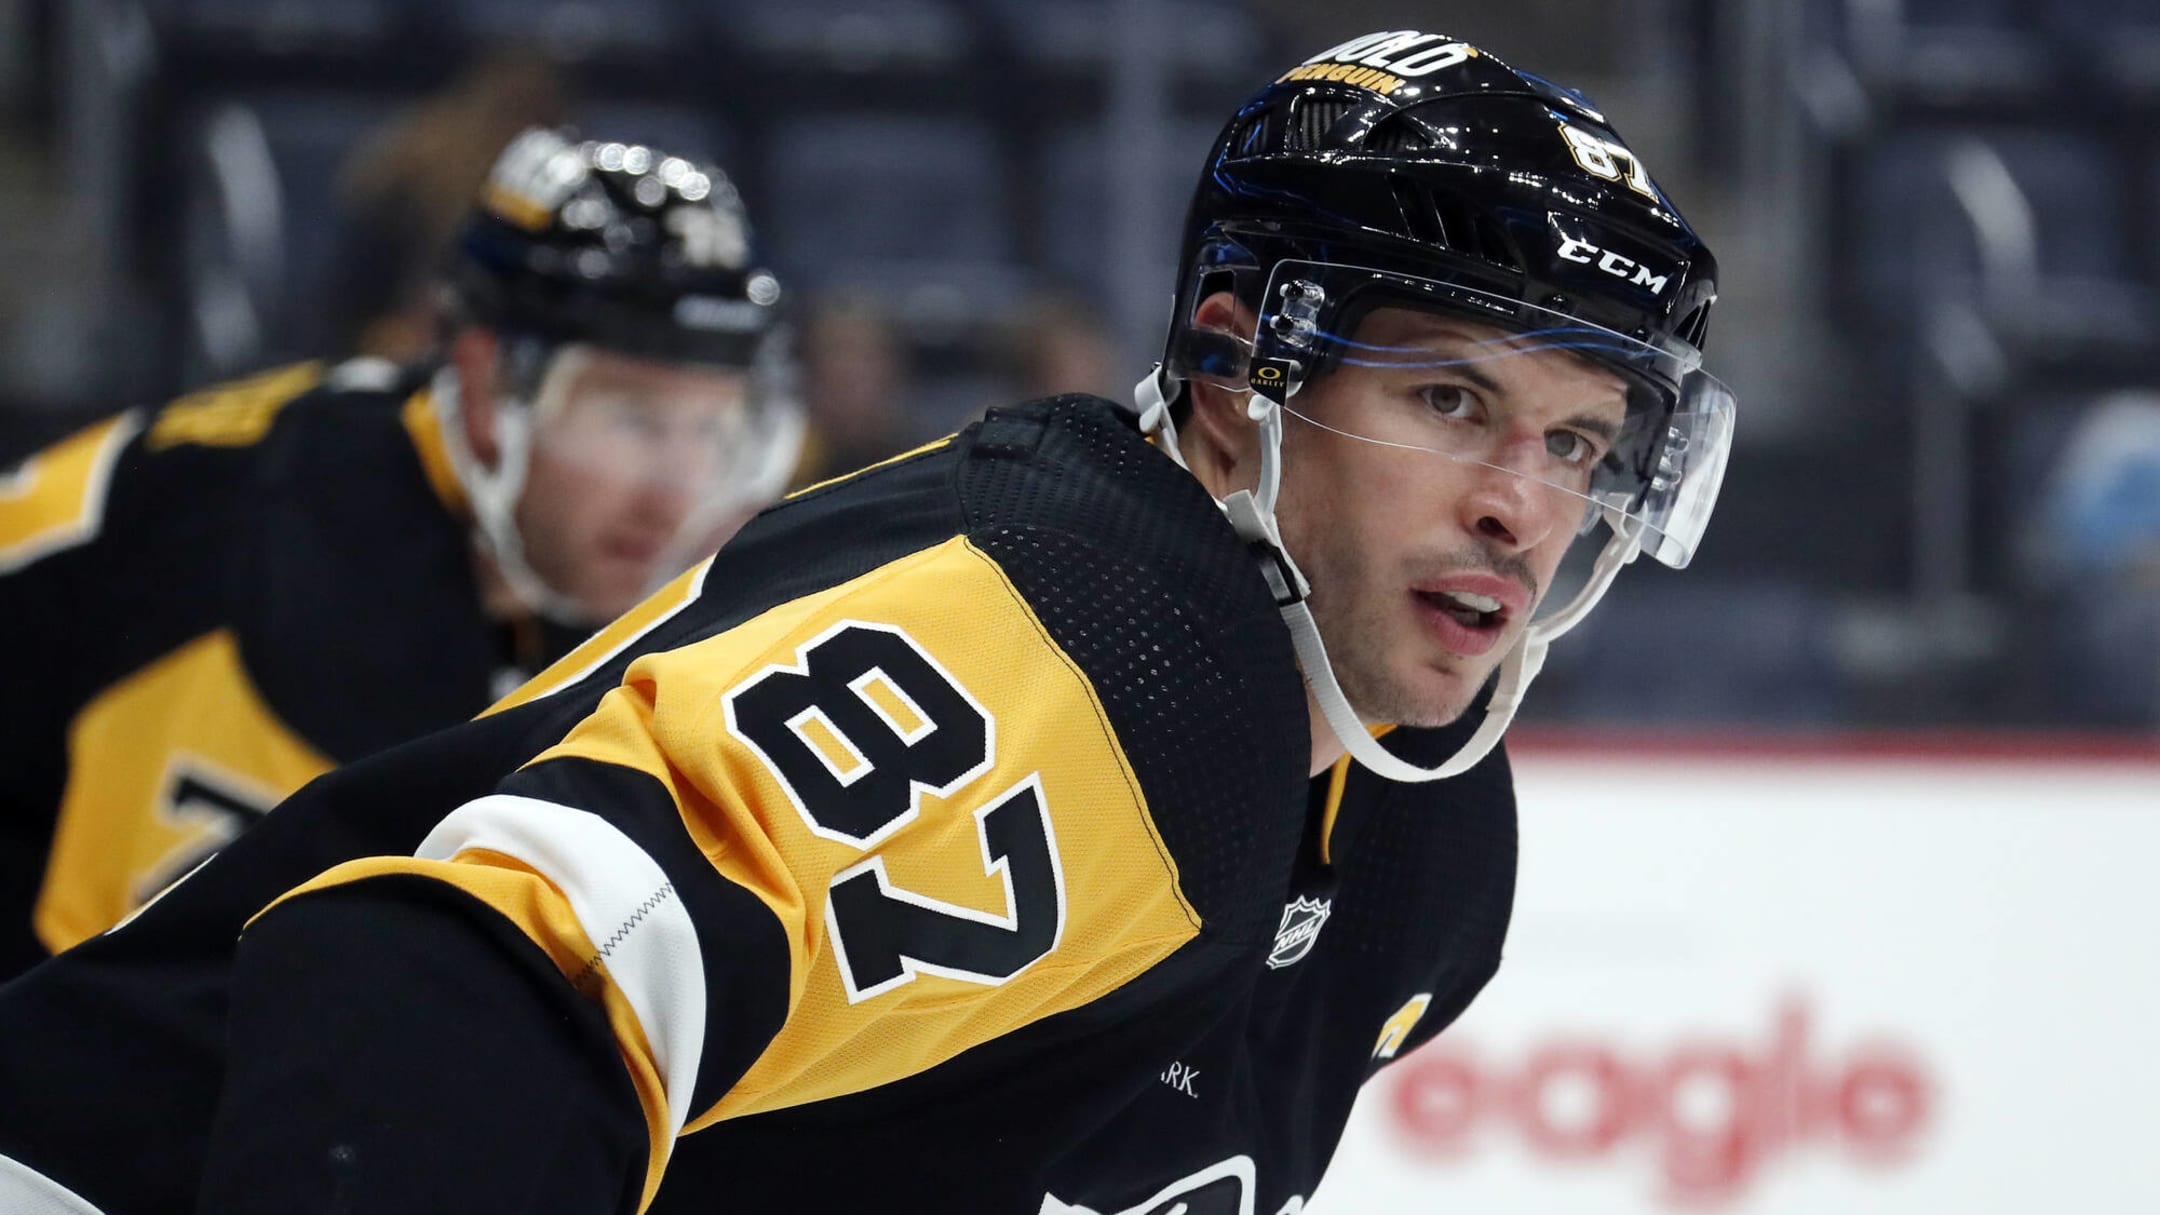 Connor Bedard took Sidney Crosby's advice in NHL debut - Ice